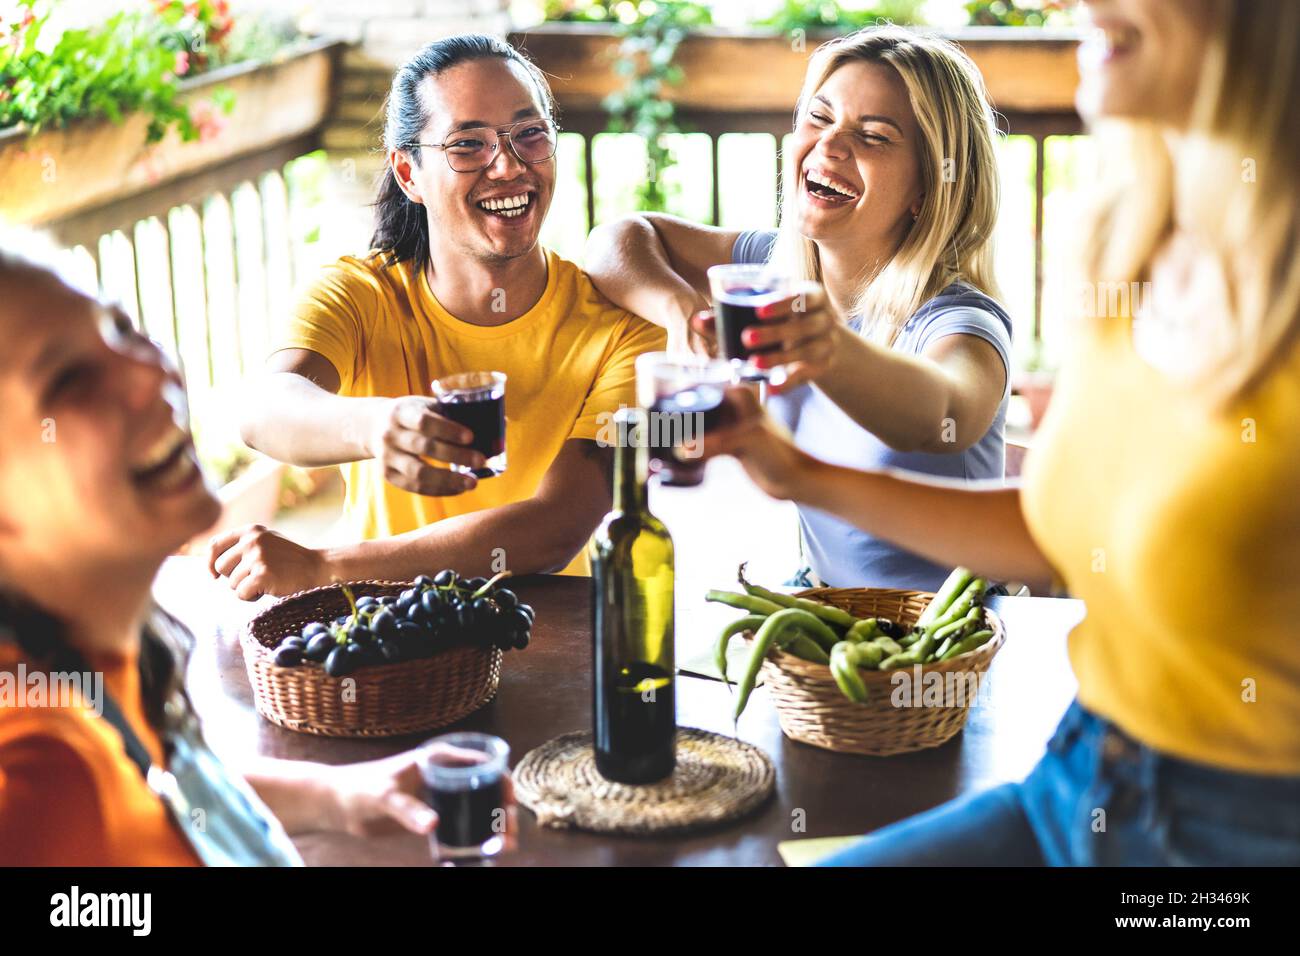 Happy friends having fun drinking at vineyard patio - Friendship concept with young people enjoying harvest together at farmhouse Stock Photo